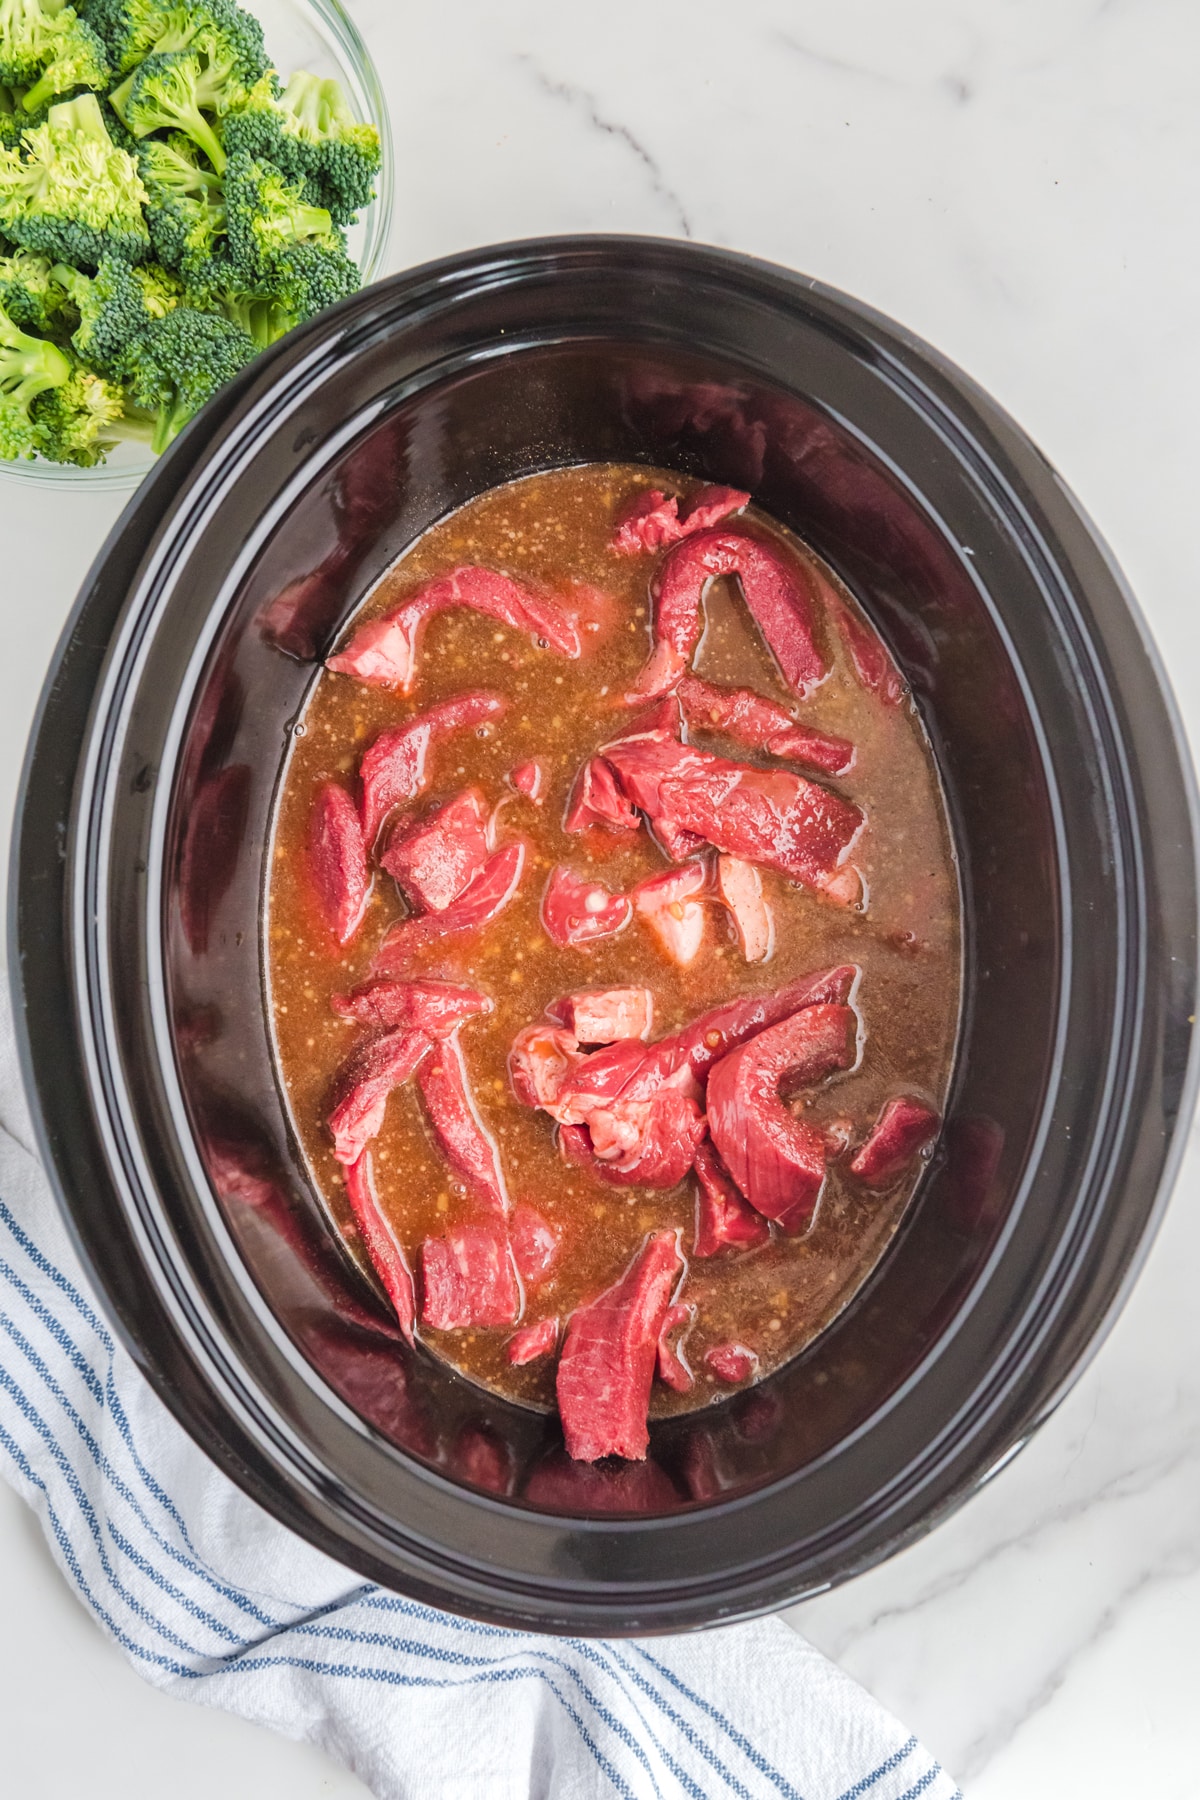 A crock pot full of beef and broccoli.